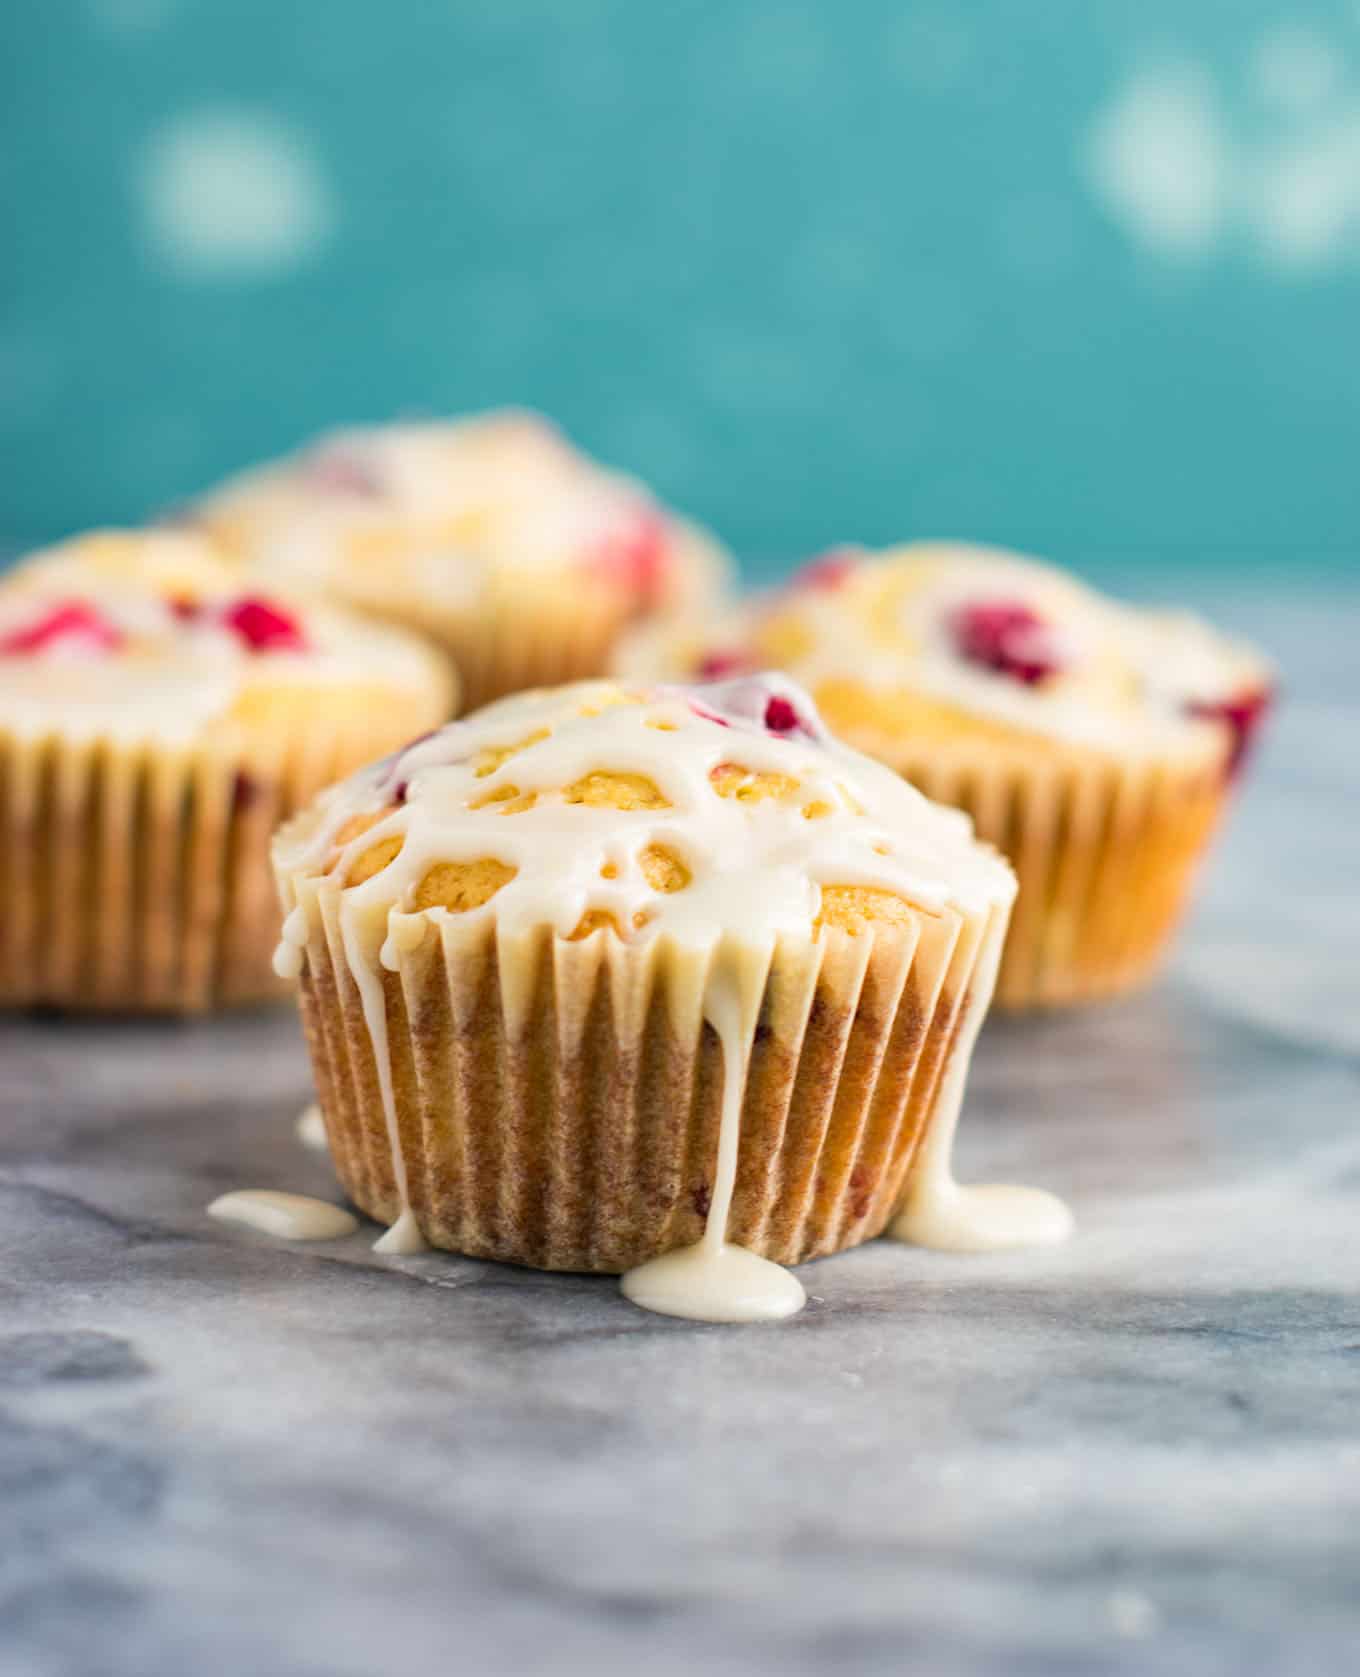 These cranberry cream cheese muffins are so delicious! Perfect homemade Christmas breakfast! #cranberry #cranberrymuffins #breakfast #christmas